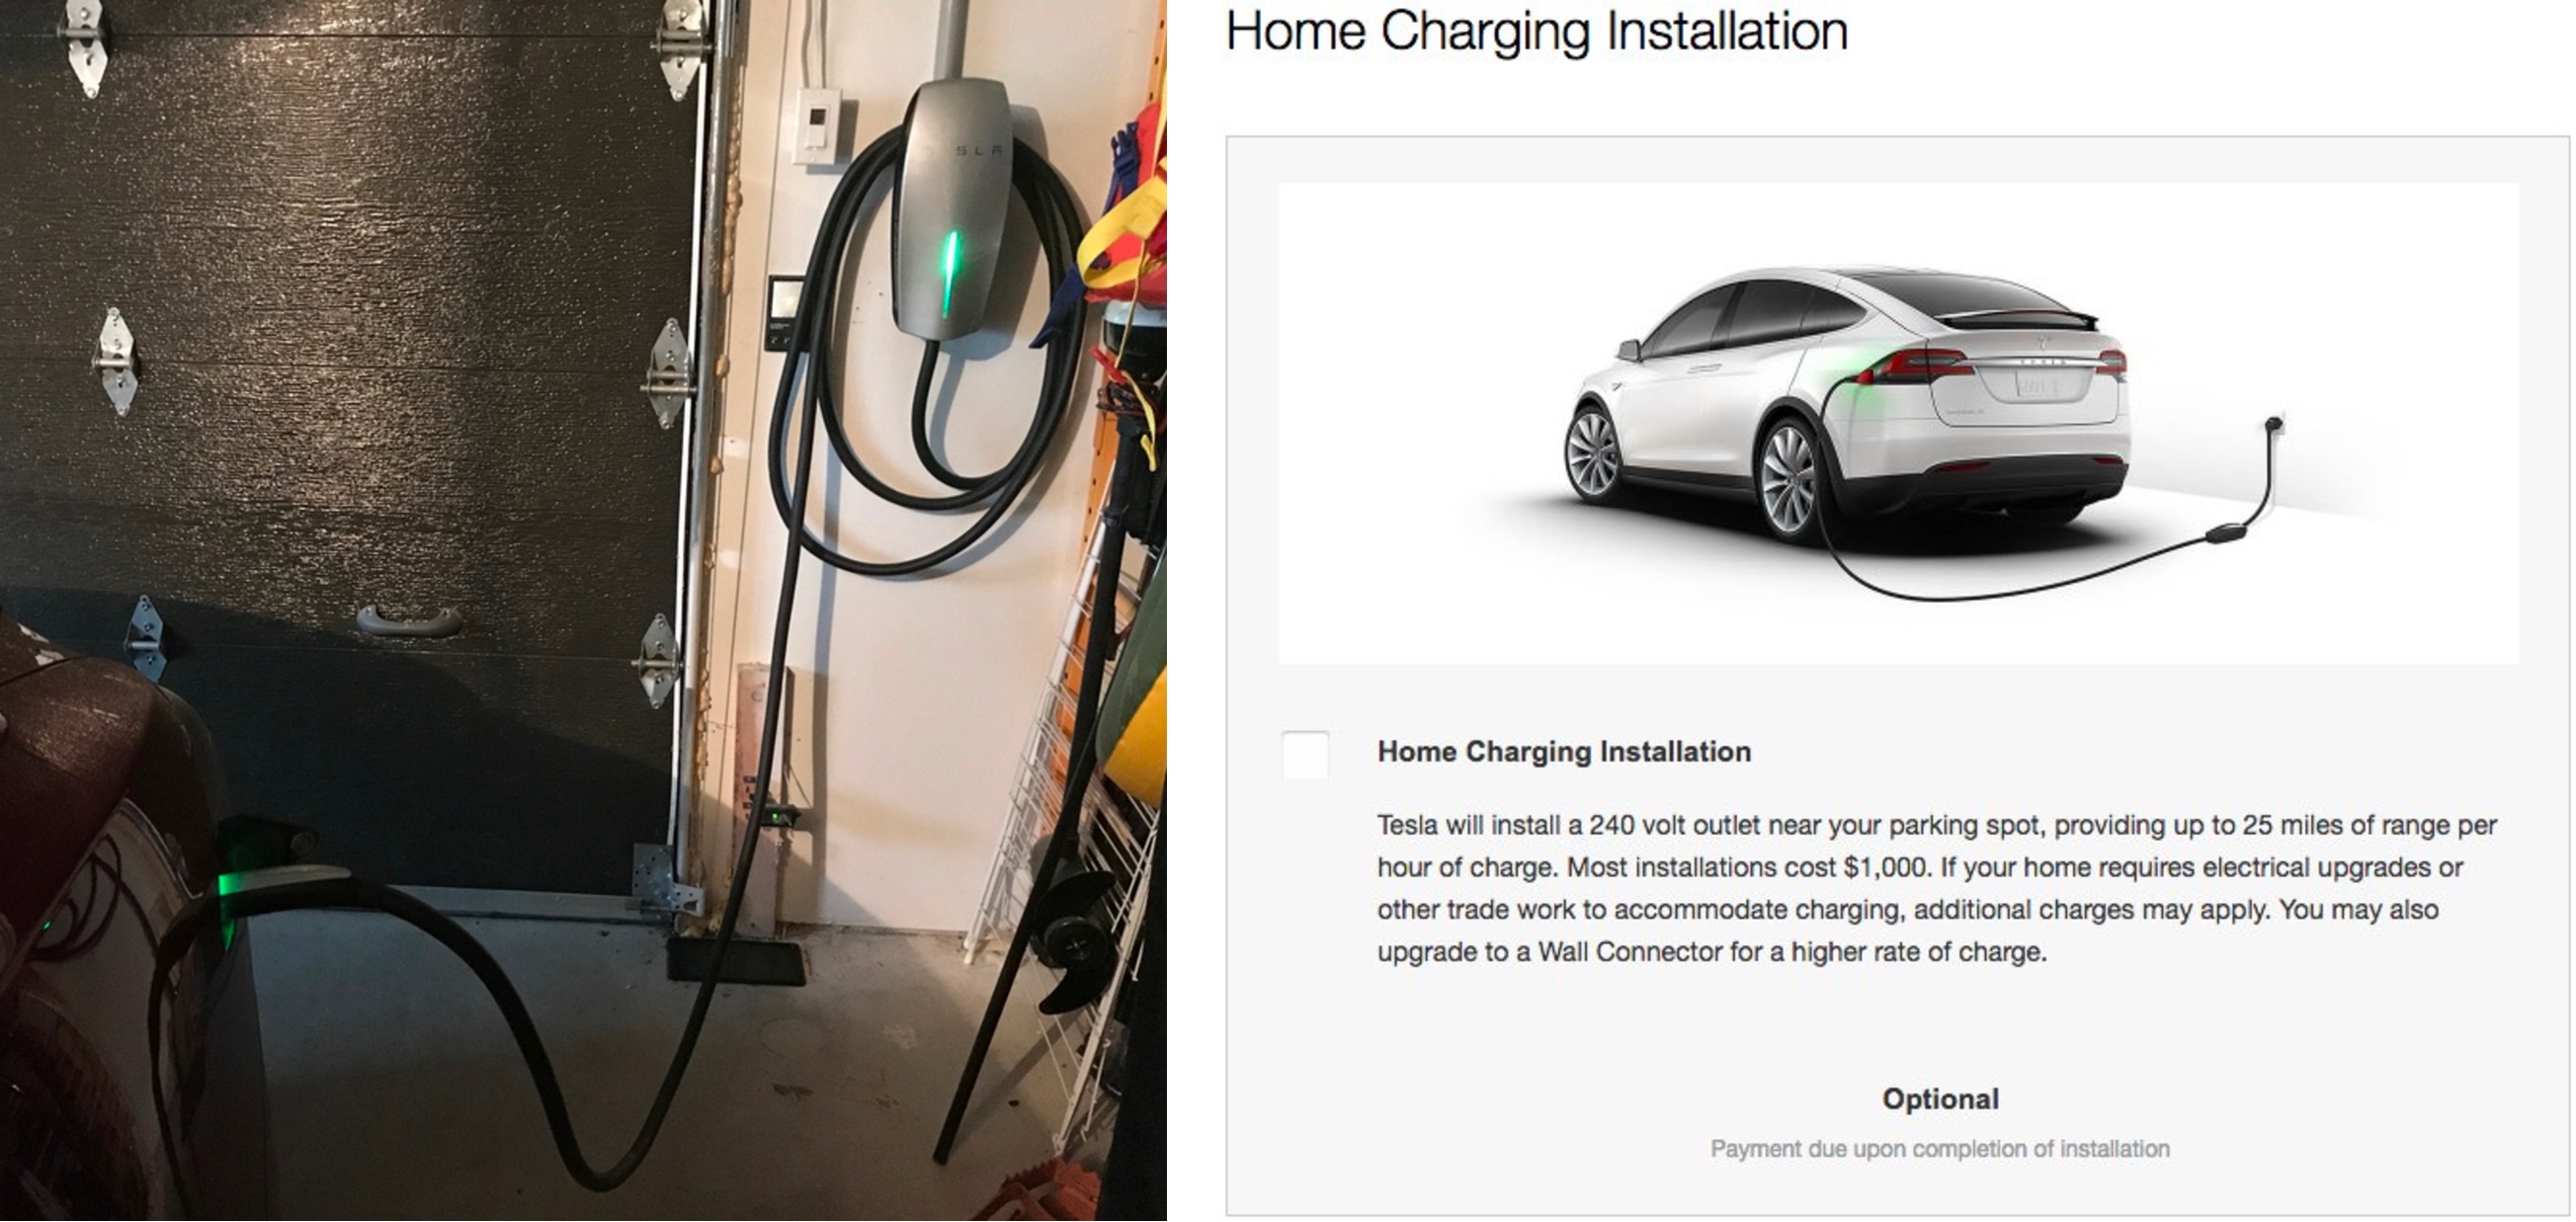 Tesla Starts Offering Home Charging Installations In Certain Markets 